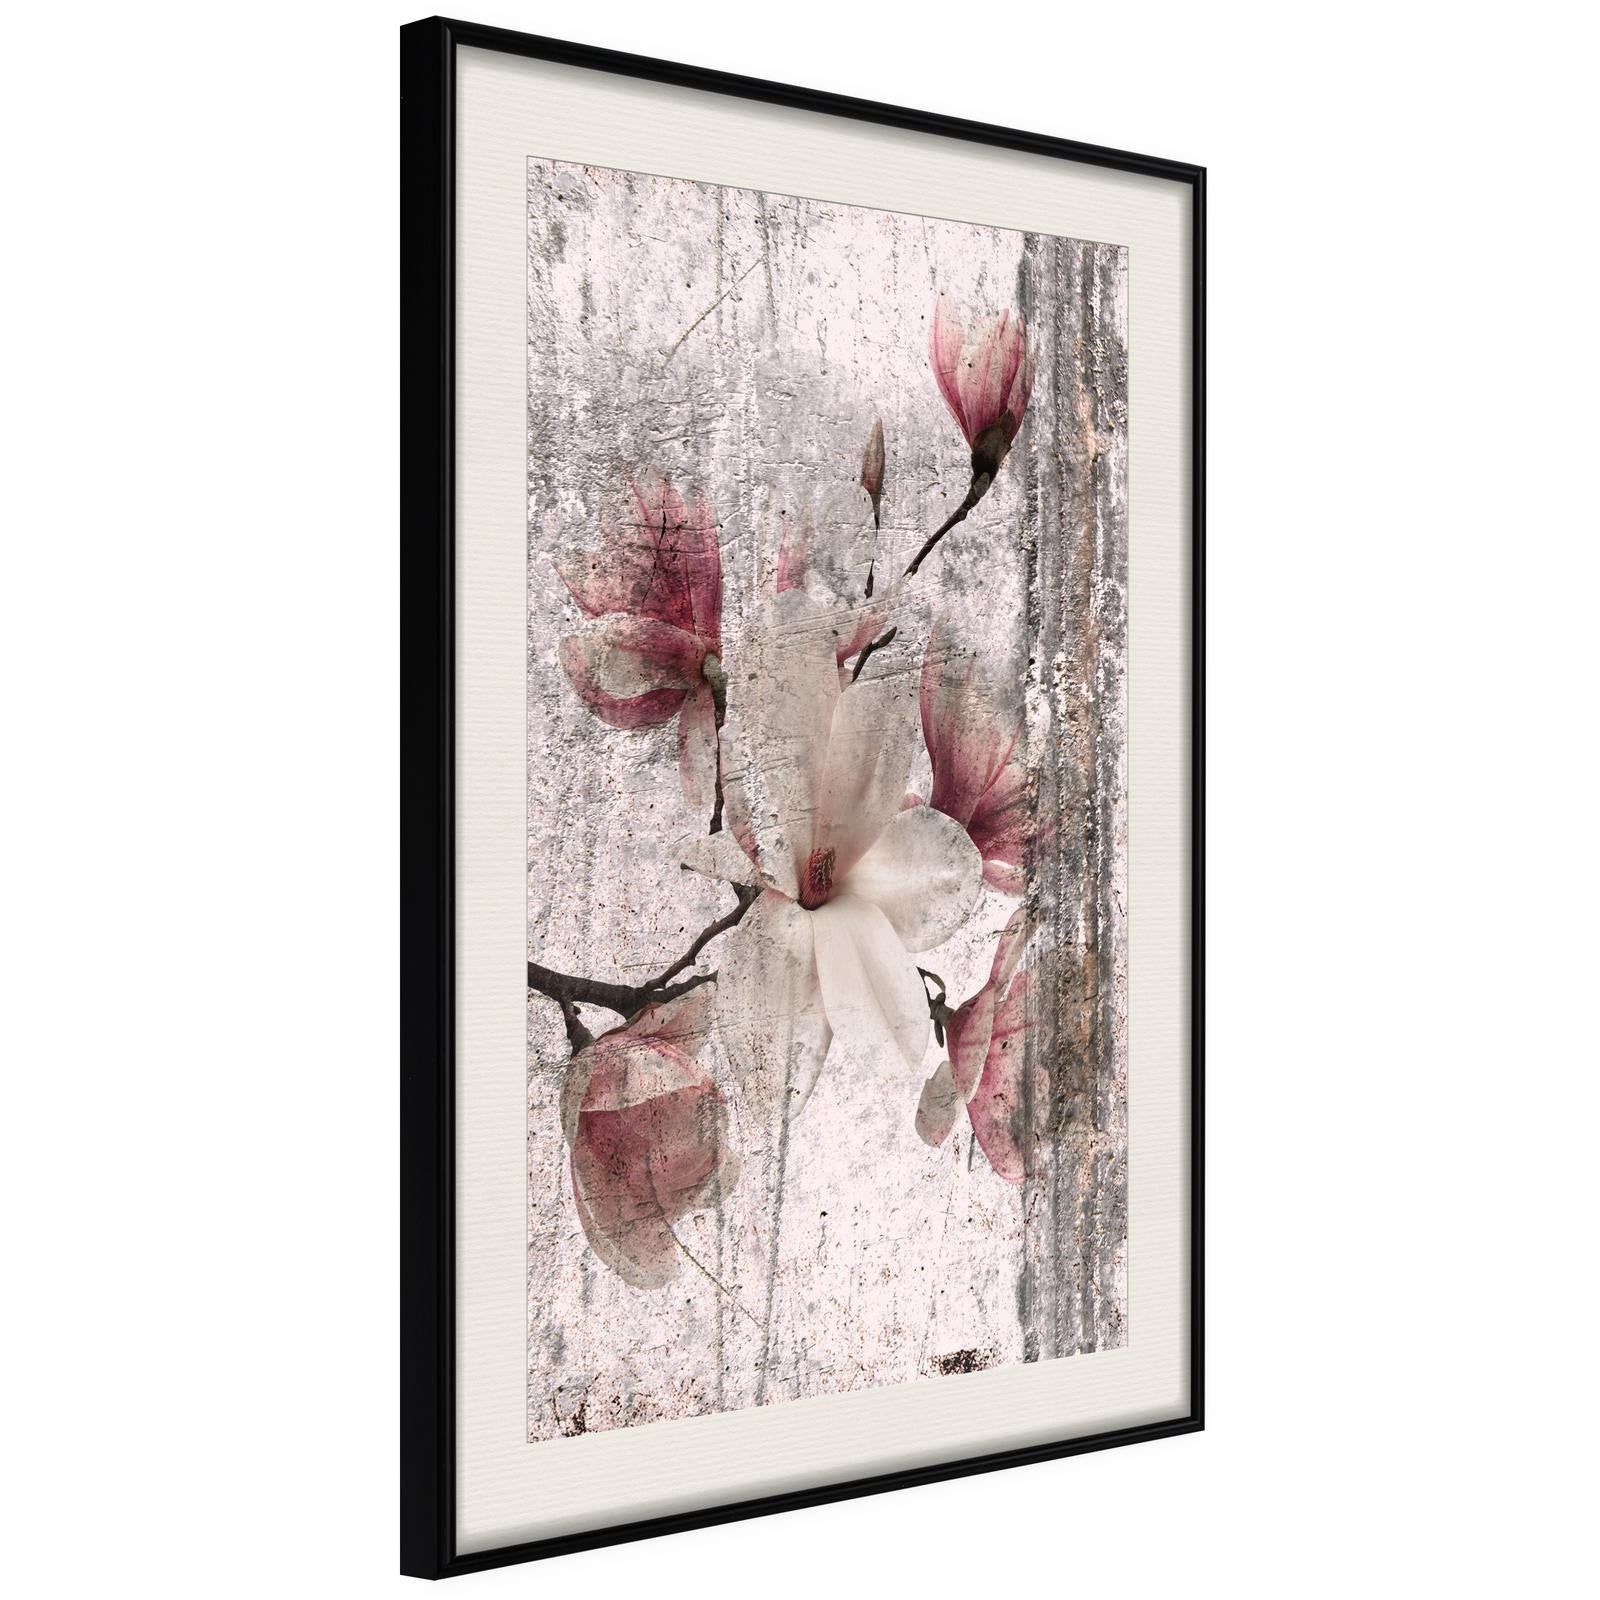 Inramad Poster / Tavla - Queen of Spring Flowers I-Poster Inramad-Artgeist-20x30-Svart ram med passepartout-peaceofhome.se